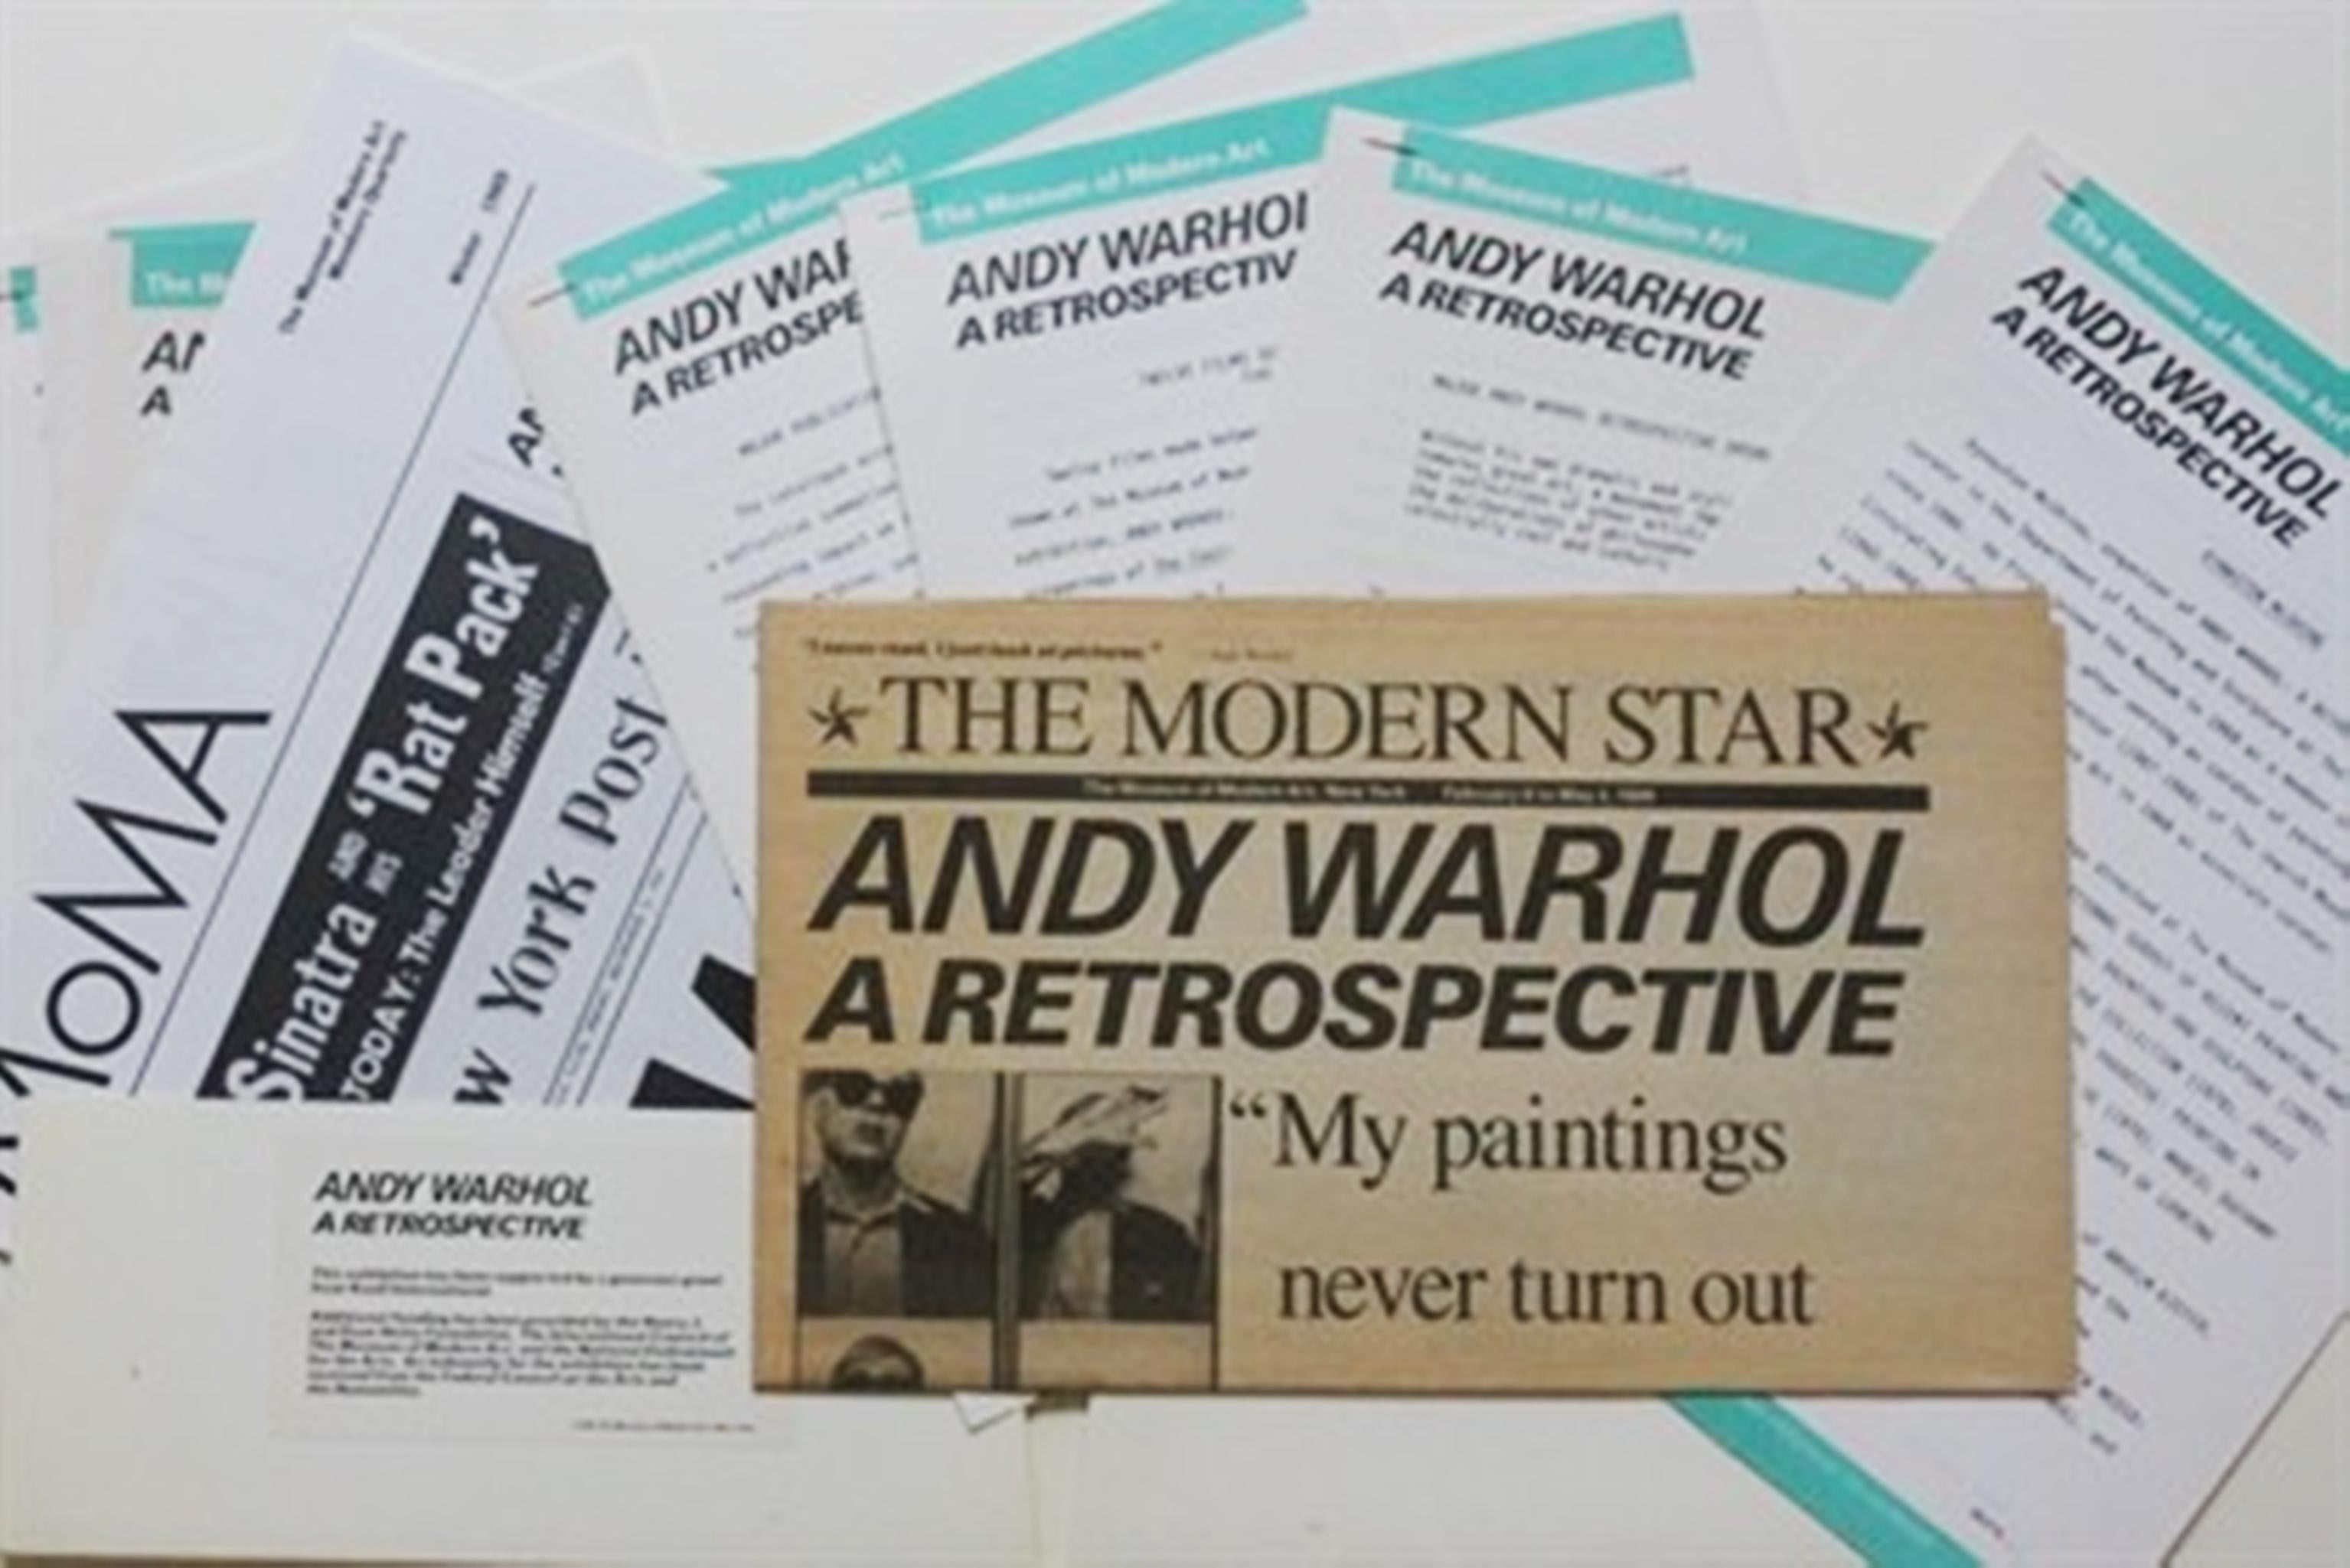 Vintage Press Kit for the Museum of Modern Art (MOMA) with historic inserts 